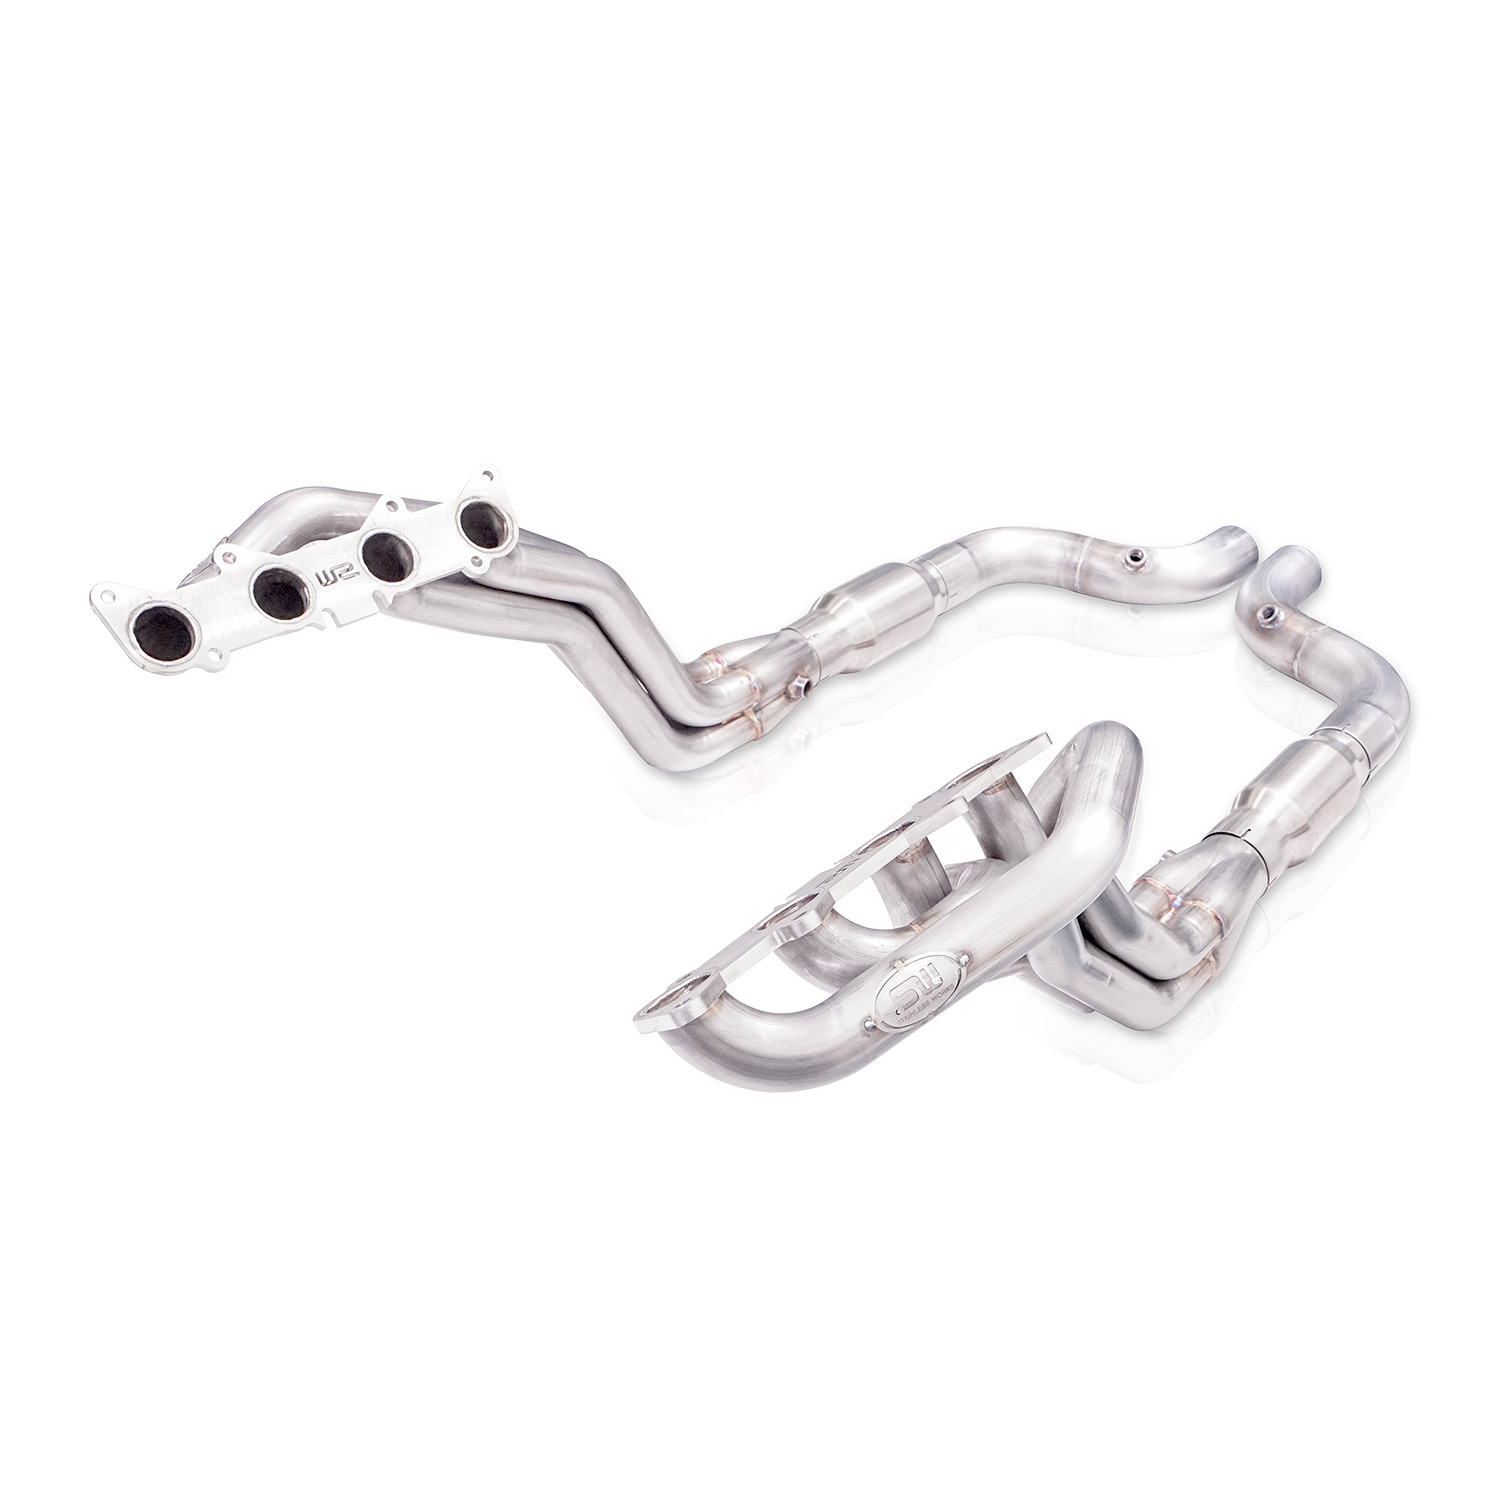 2015-2020 Mustang Shelby GT350 5.2L, 2015-2020 Mustang GT350R 5.2L SW Headers 1-7/8" With Catted Leads Performance Connect